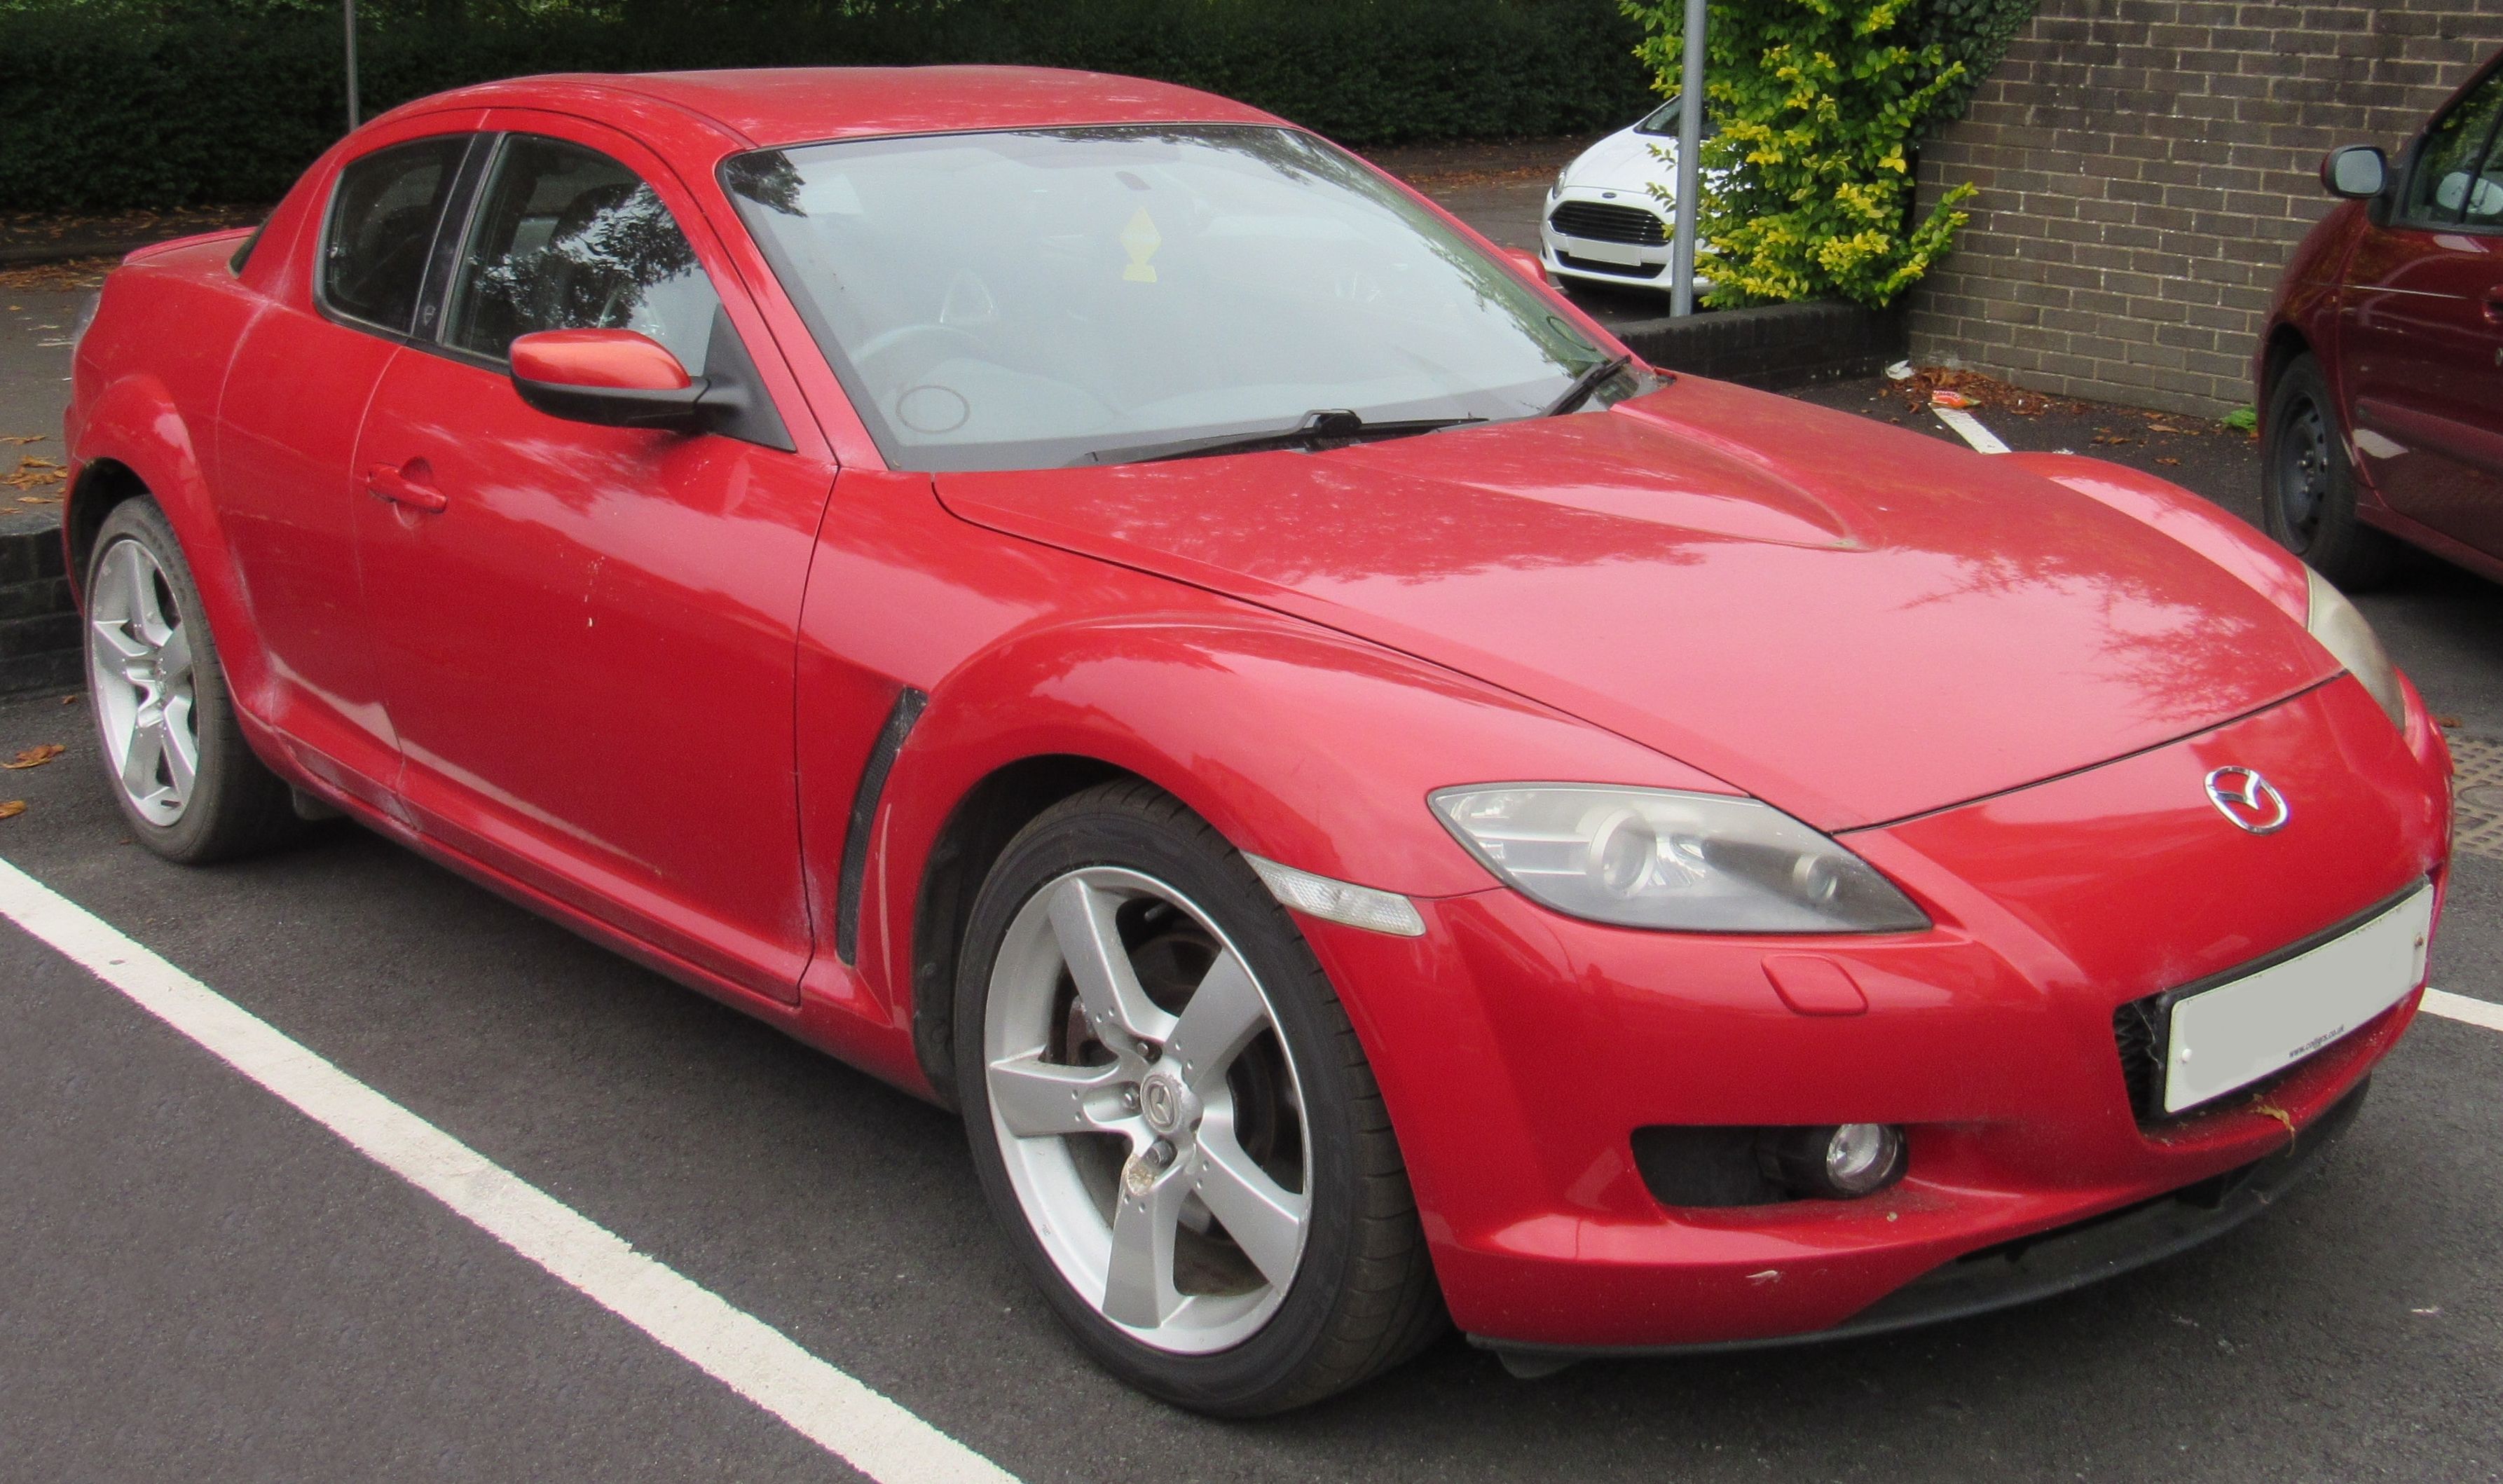 2006 RX-8 with a Wankel rotary engine